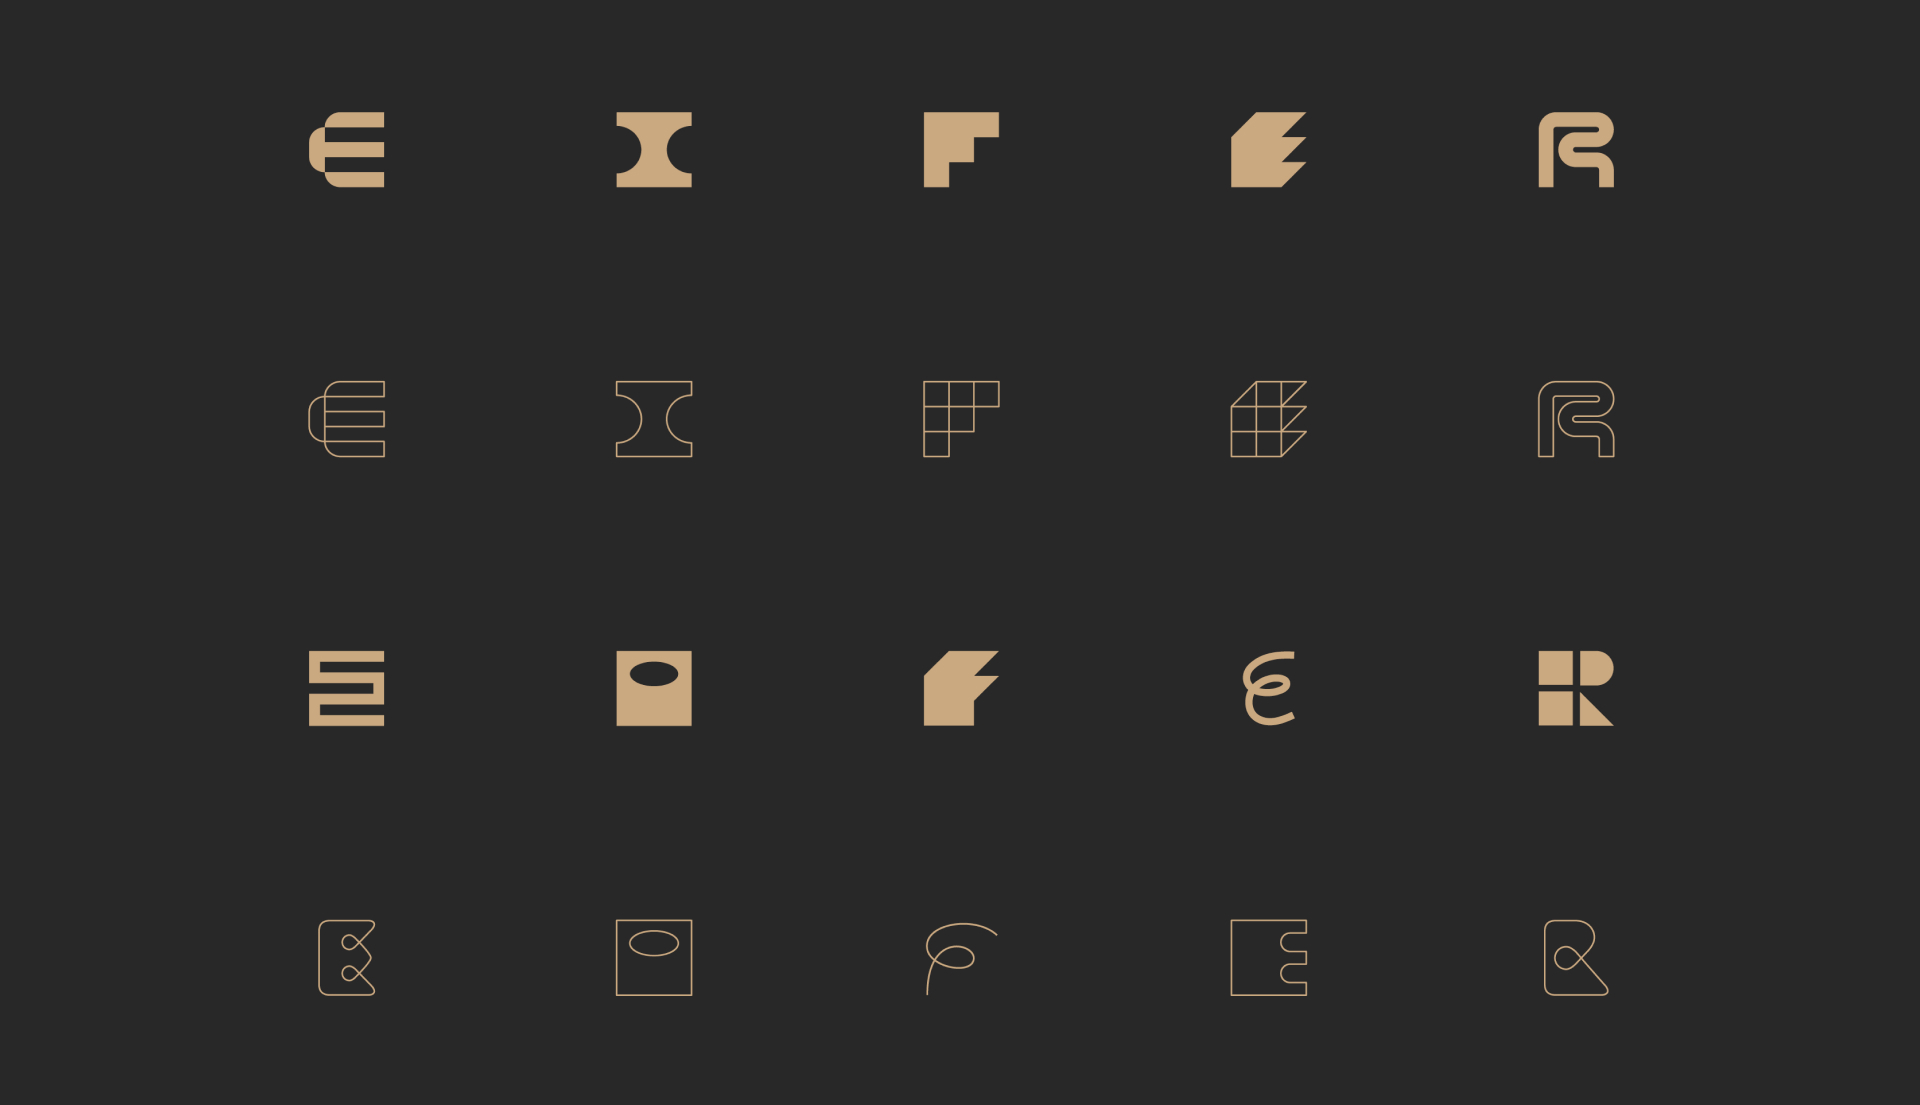 Eifer logo typography system showing variations of letterforms.